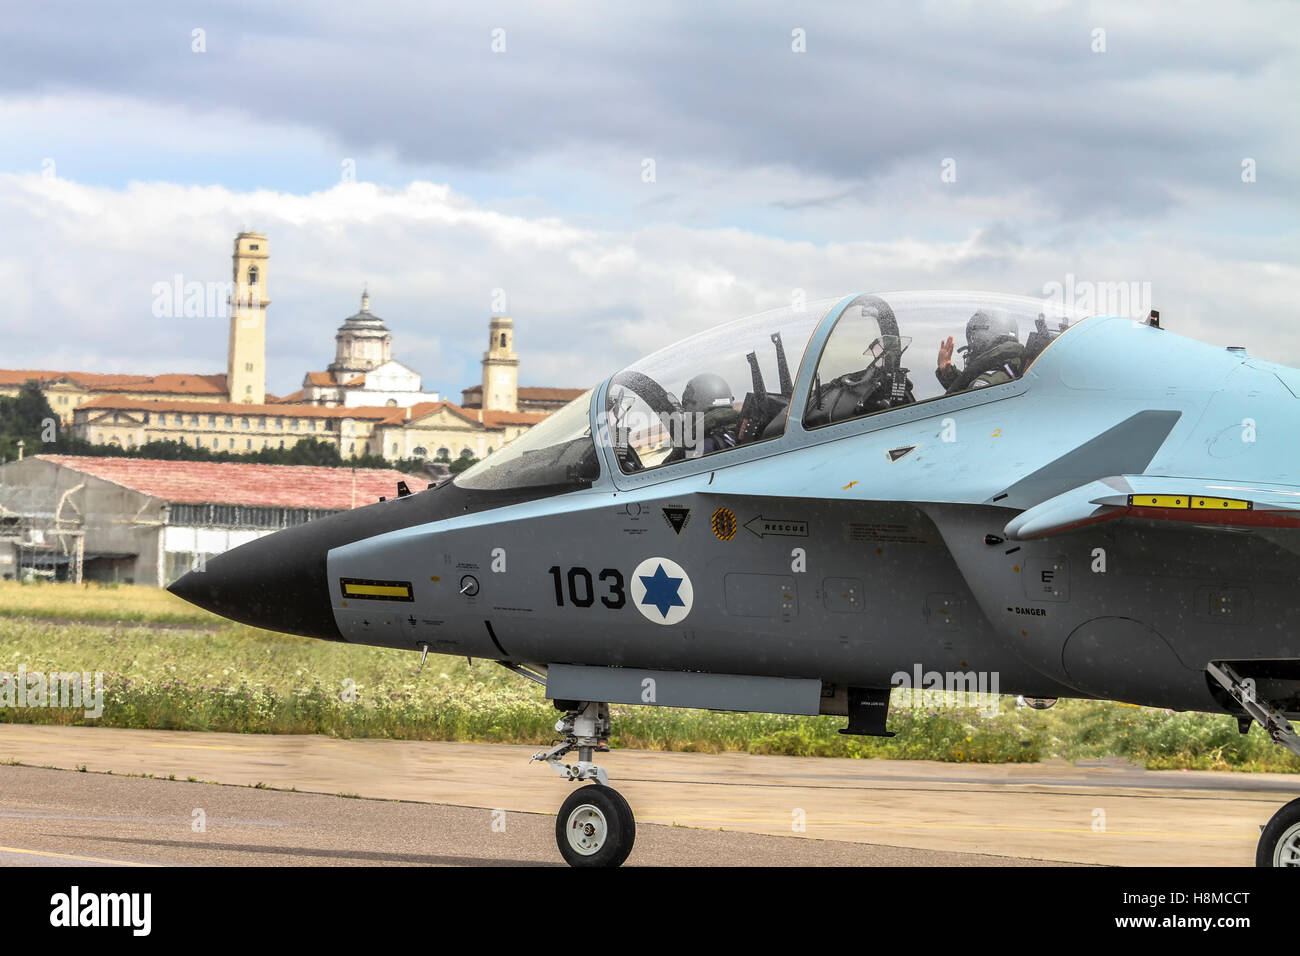 Israeli Air Force Alenia Aermacchi M-346 Master (IAF Lavi) a military twin-engine transonic trainer aircraft. Photographed in It Stock Photo